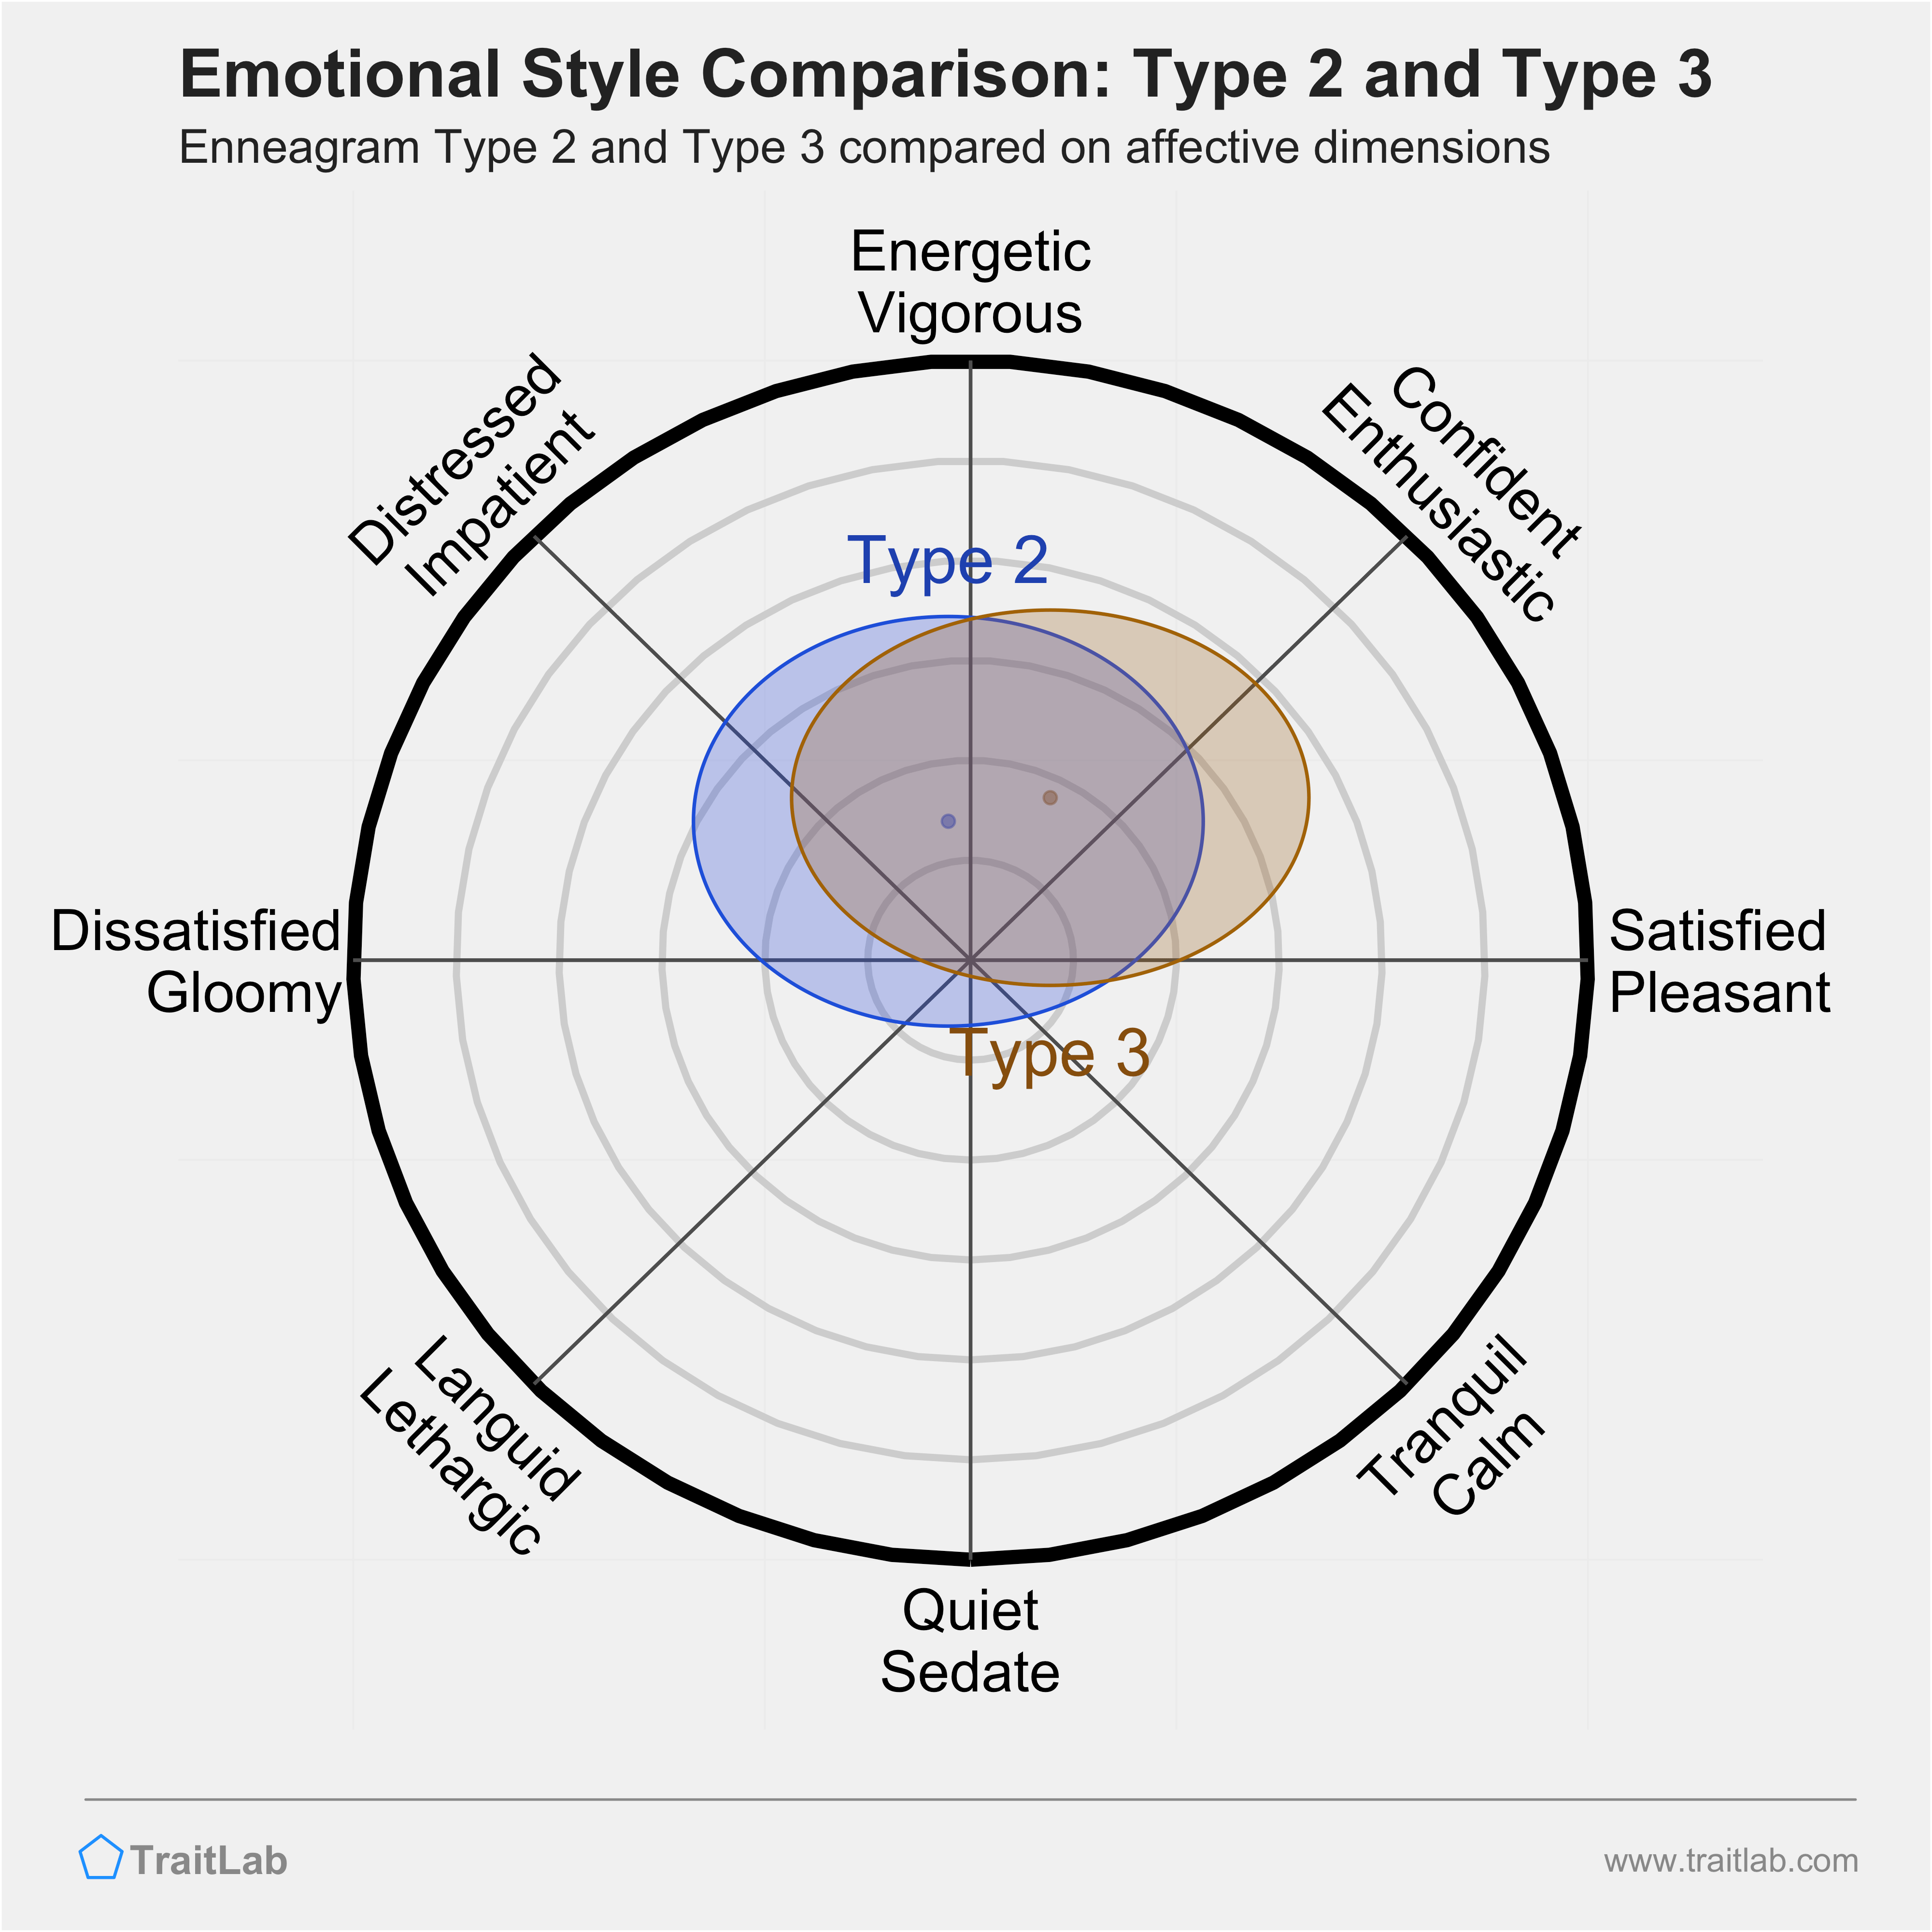 Type 2 and Type 3 comparison across emotional (affective) dimensions